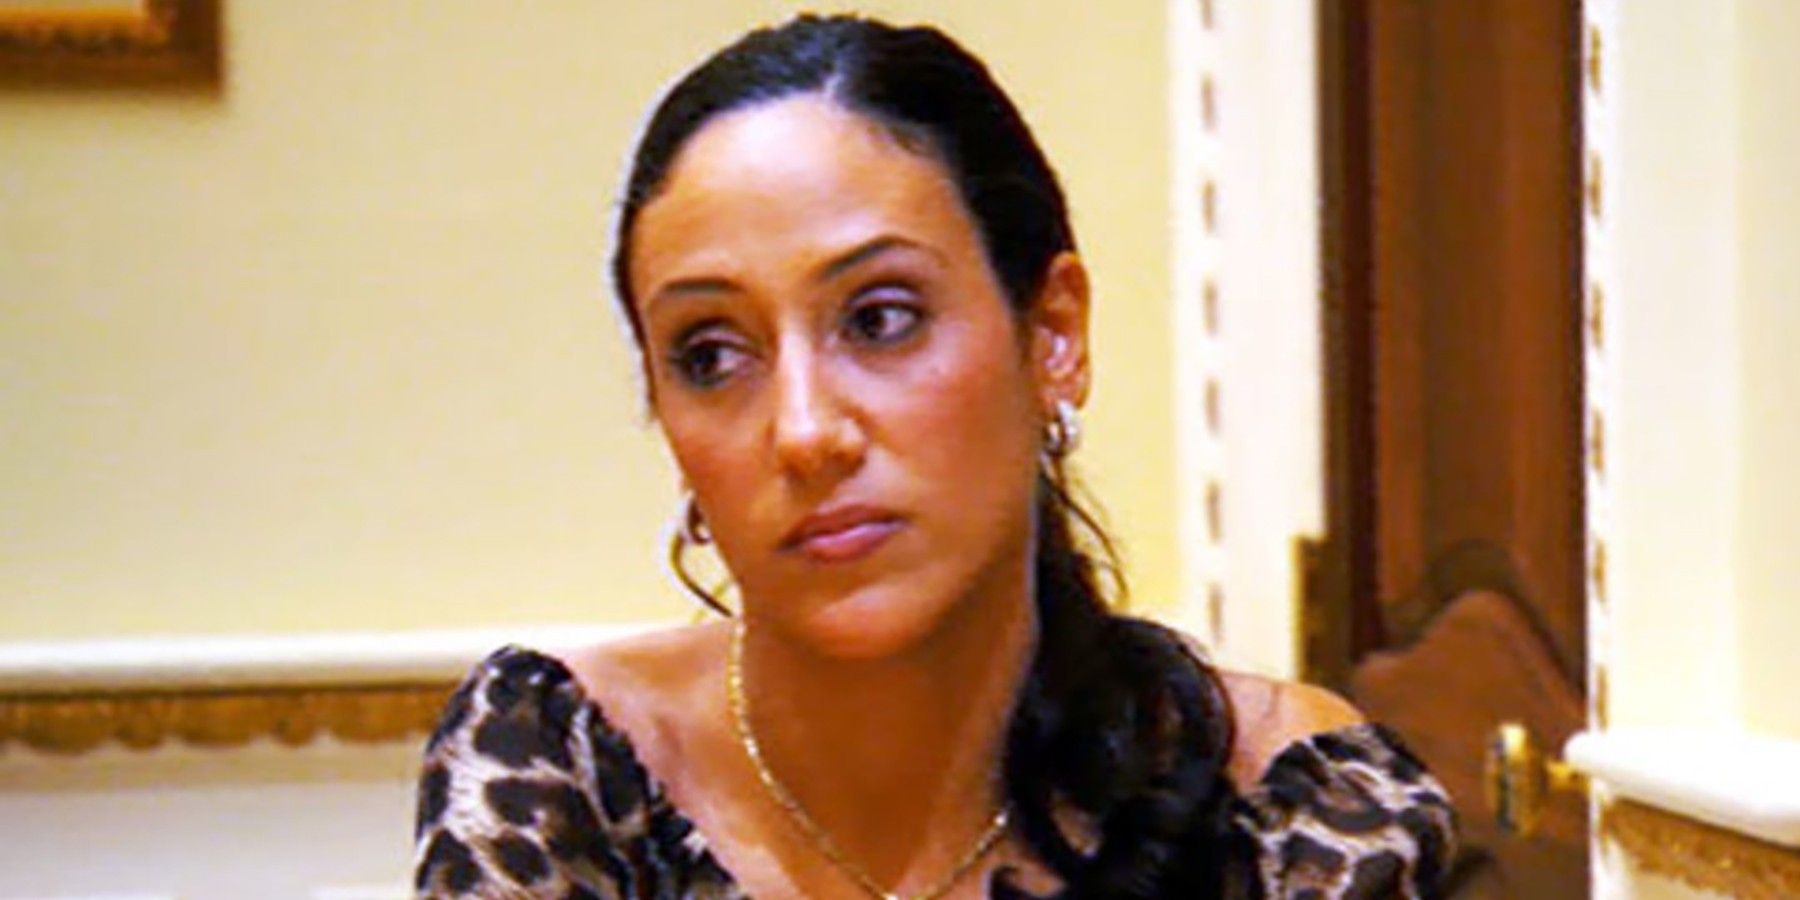 melissa gorga the real housewives of new jersey RHONJ